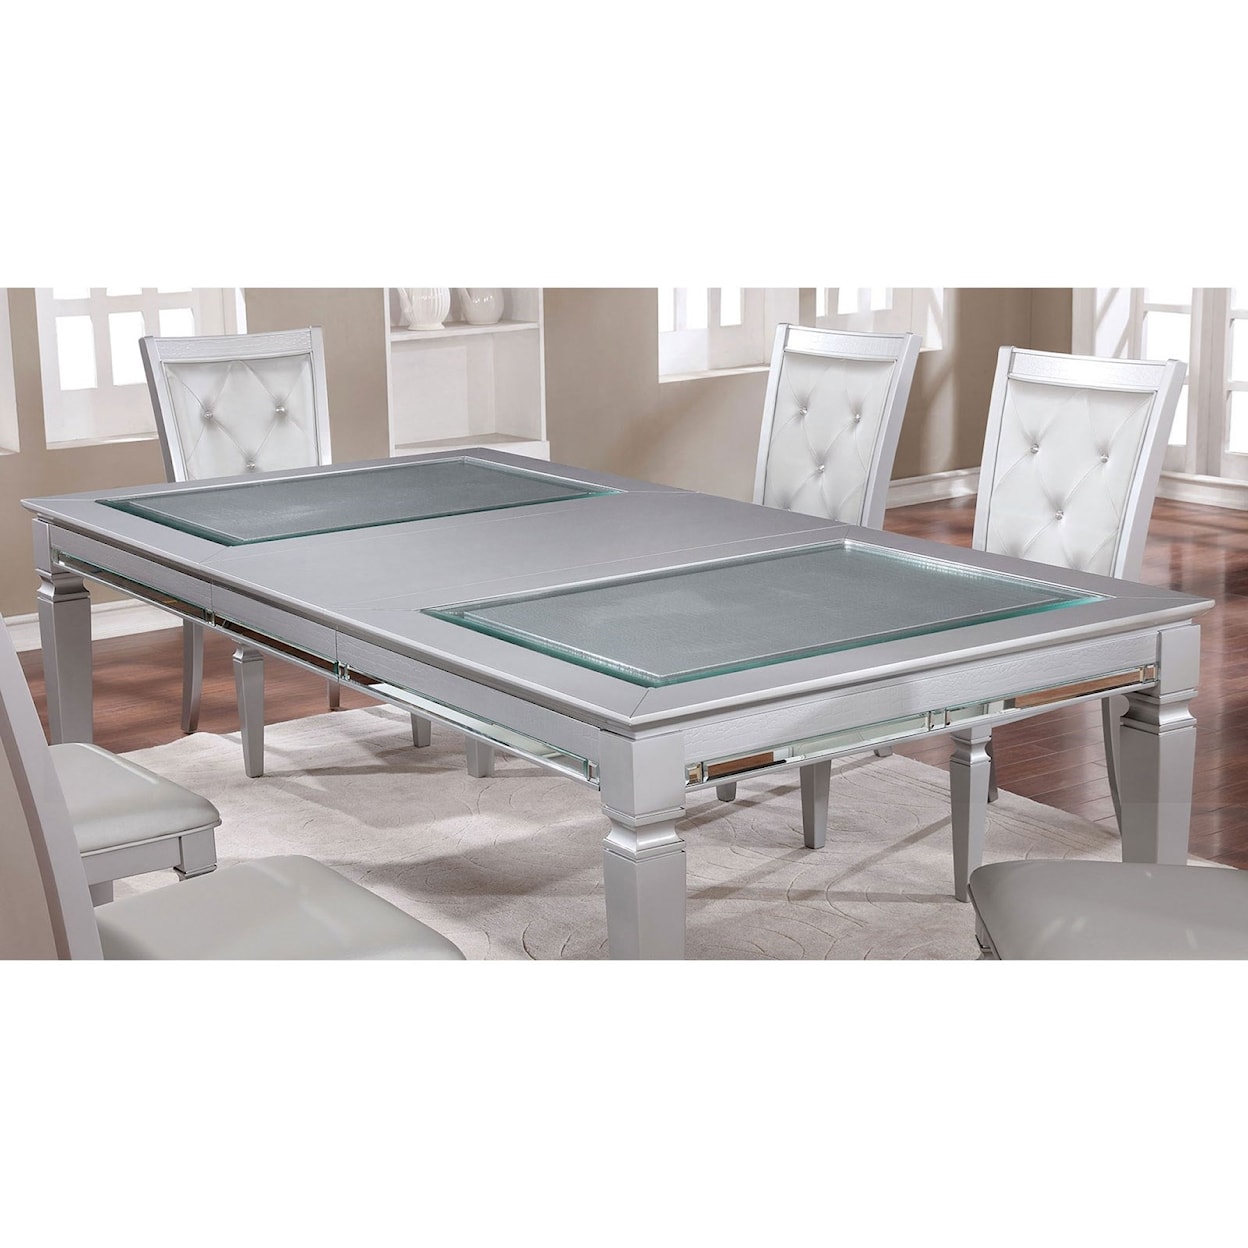 Furniture of America Alena Dining Table